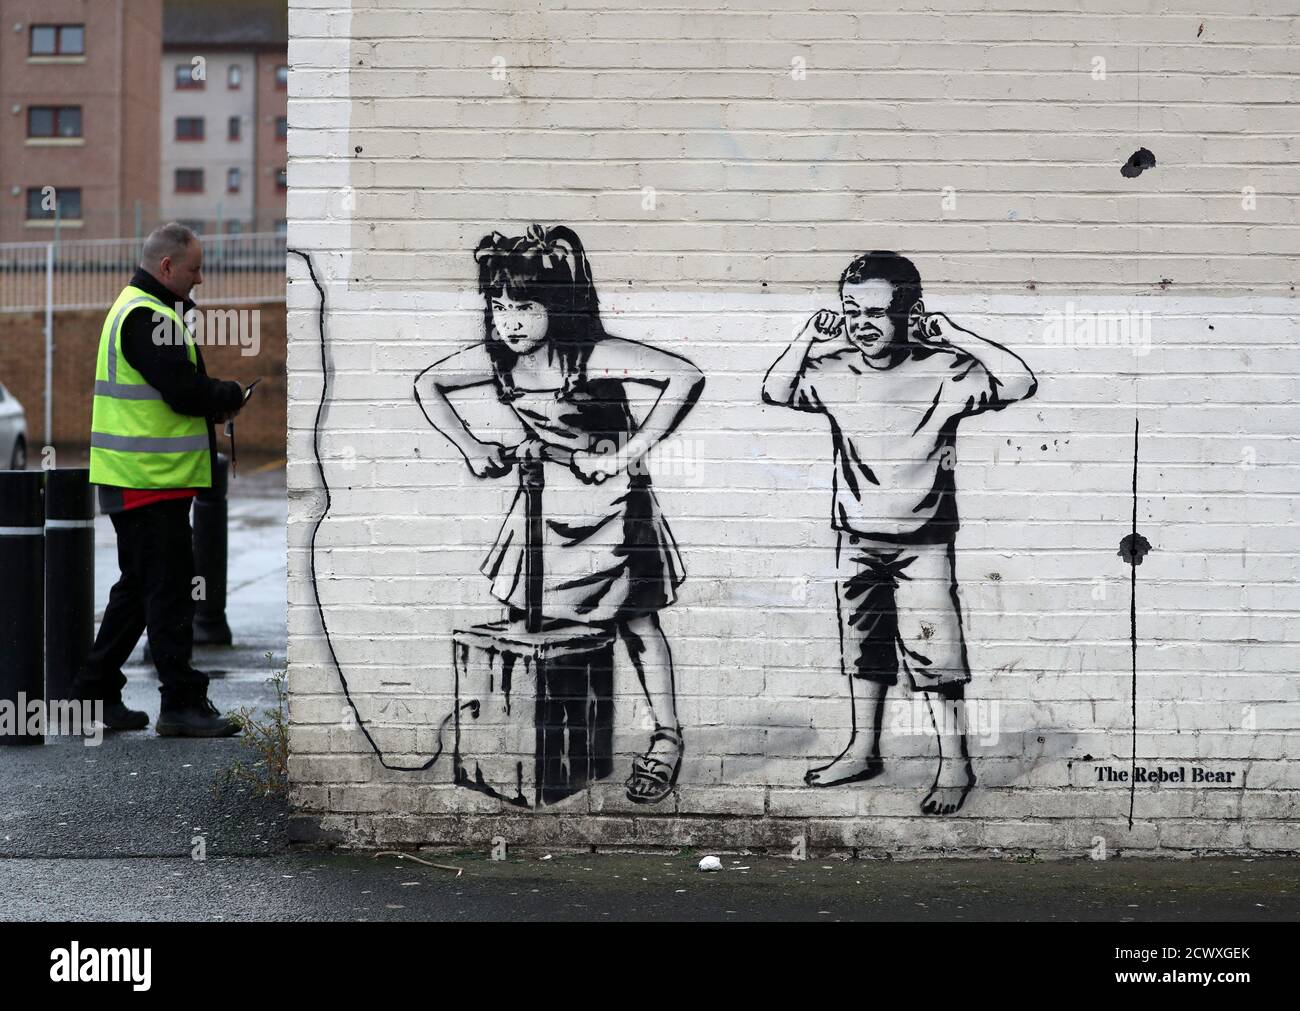 Art work by graffiti artist The Rebel Bear which has recently appeared showing two children about to detonate explosives at a cashline at a shopping centre in Cambuslang. Over recent months the artist has drawn several coronavirus related drawings in Glasgow. Stock Photo